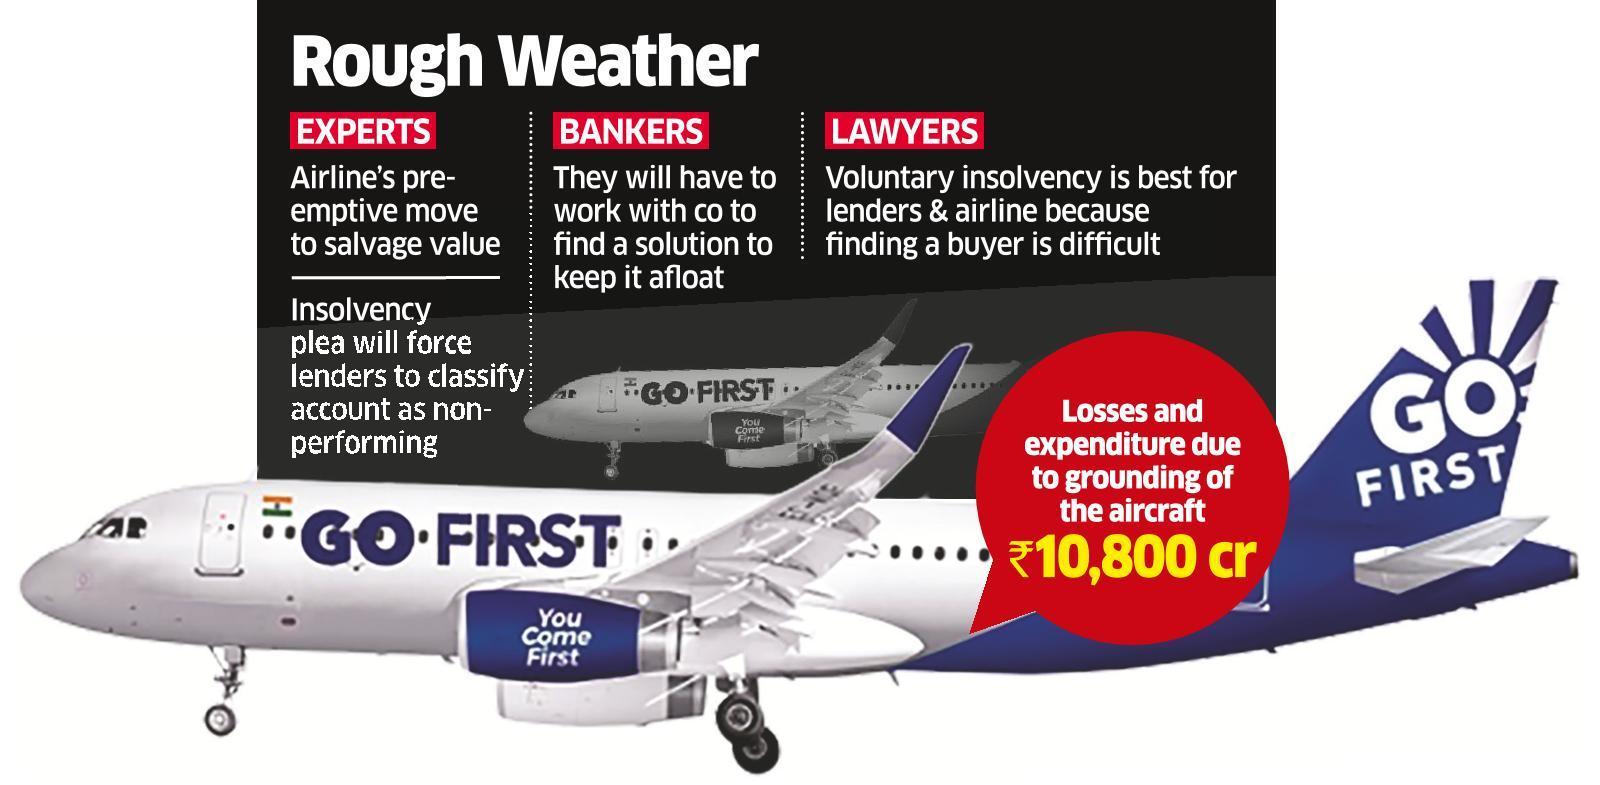 Go First Bankruptcy Ruling - Asiana Times